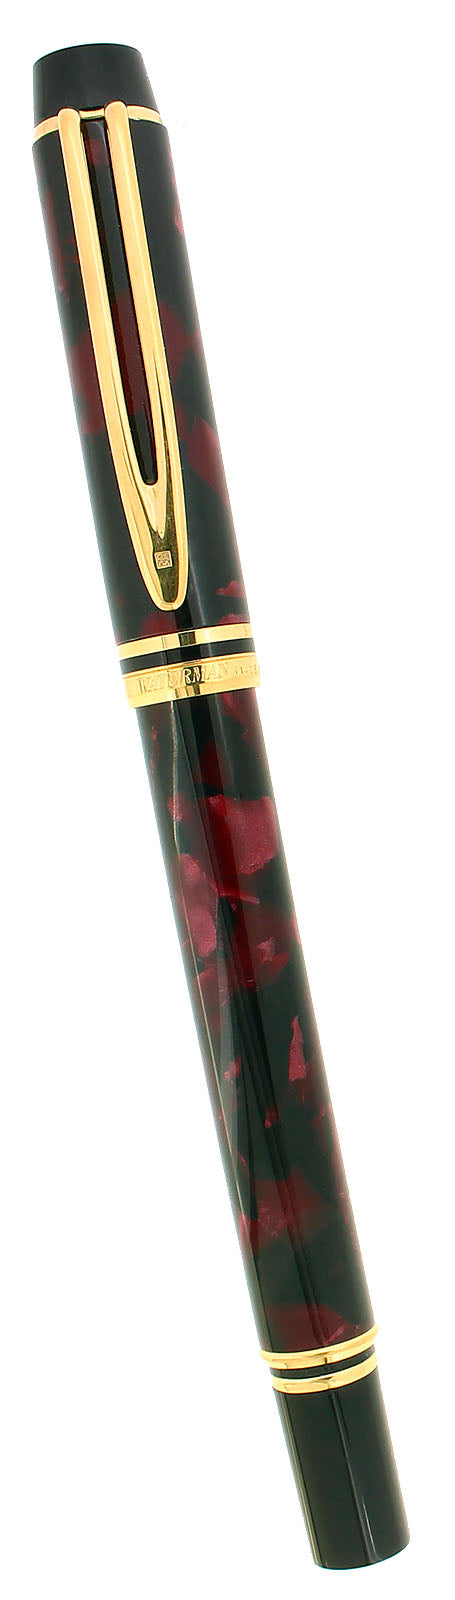 C2000 WATERMAN IDEAL LE MAN 200 MINERAL RED 18K FINE NIB FOUNTAIN PEN NEAR MINT OFFERED BY ANTIQUE DIGGER